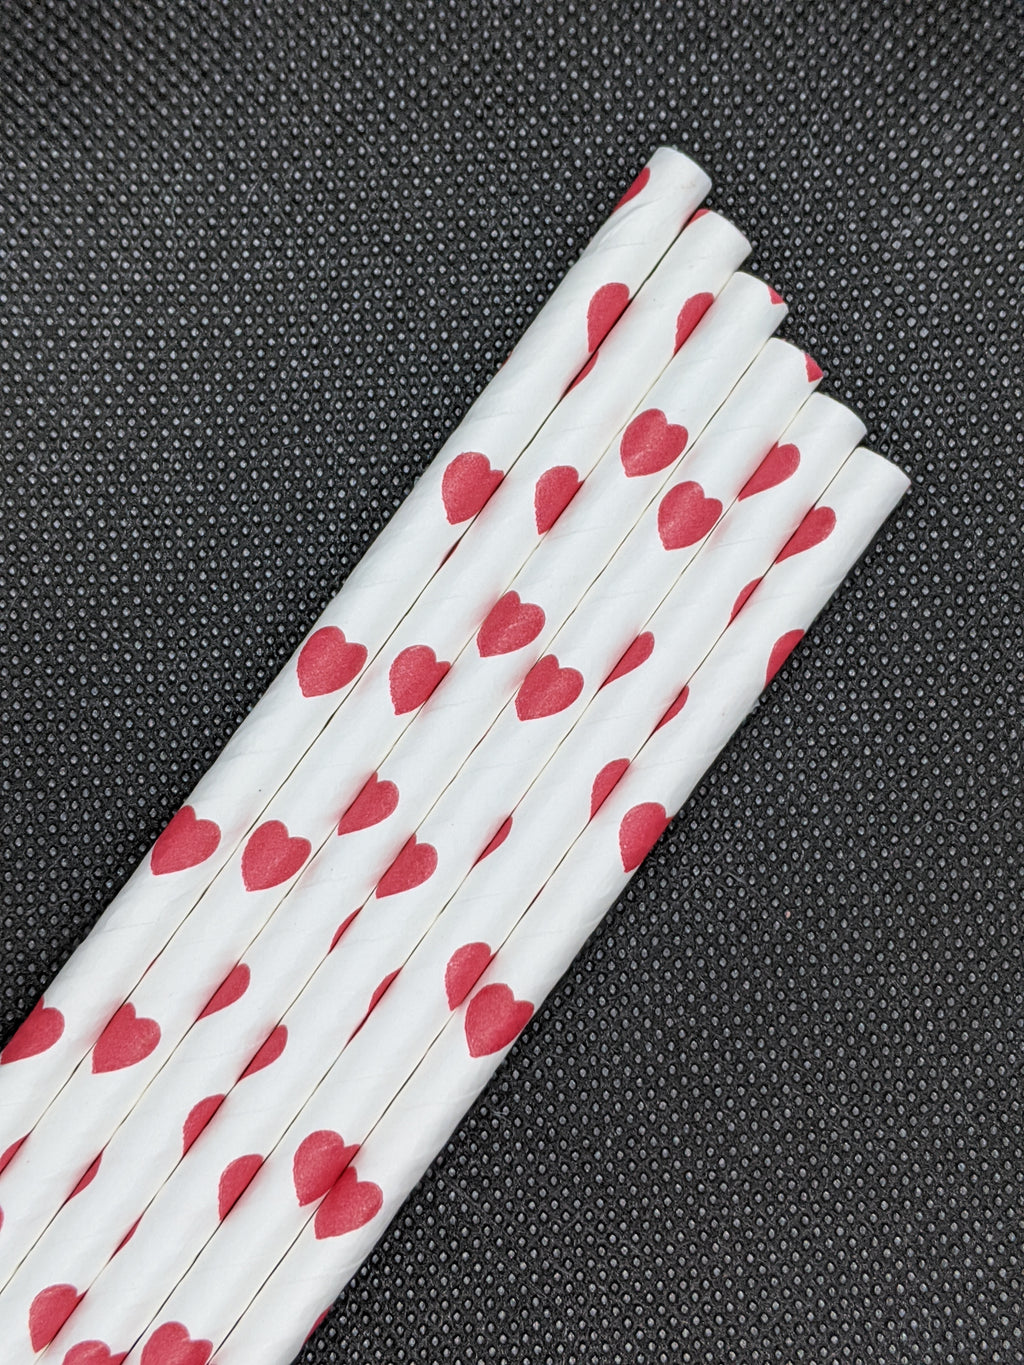 7.75" PAPER STRAWS - RED HEART DESIGN - 4000 CT (UNWRAPPED) - Orcas Ocean Straws